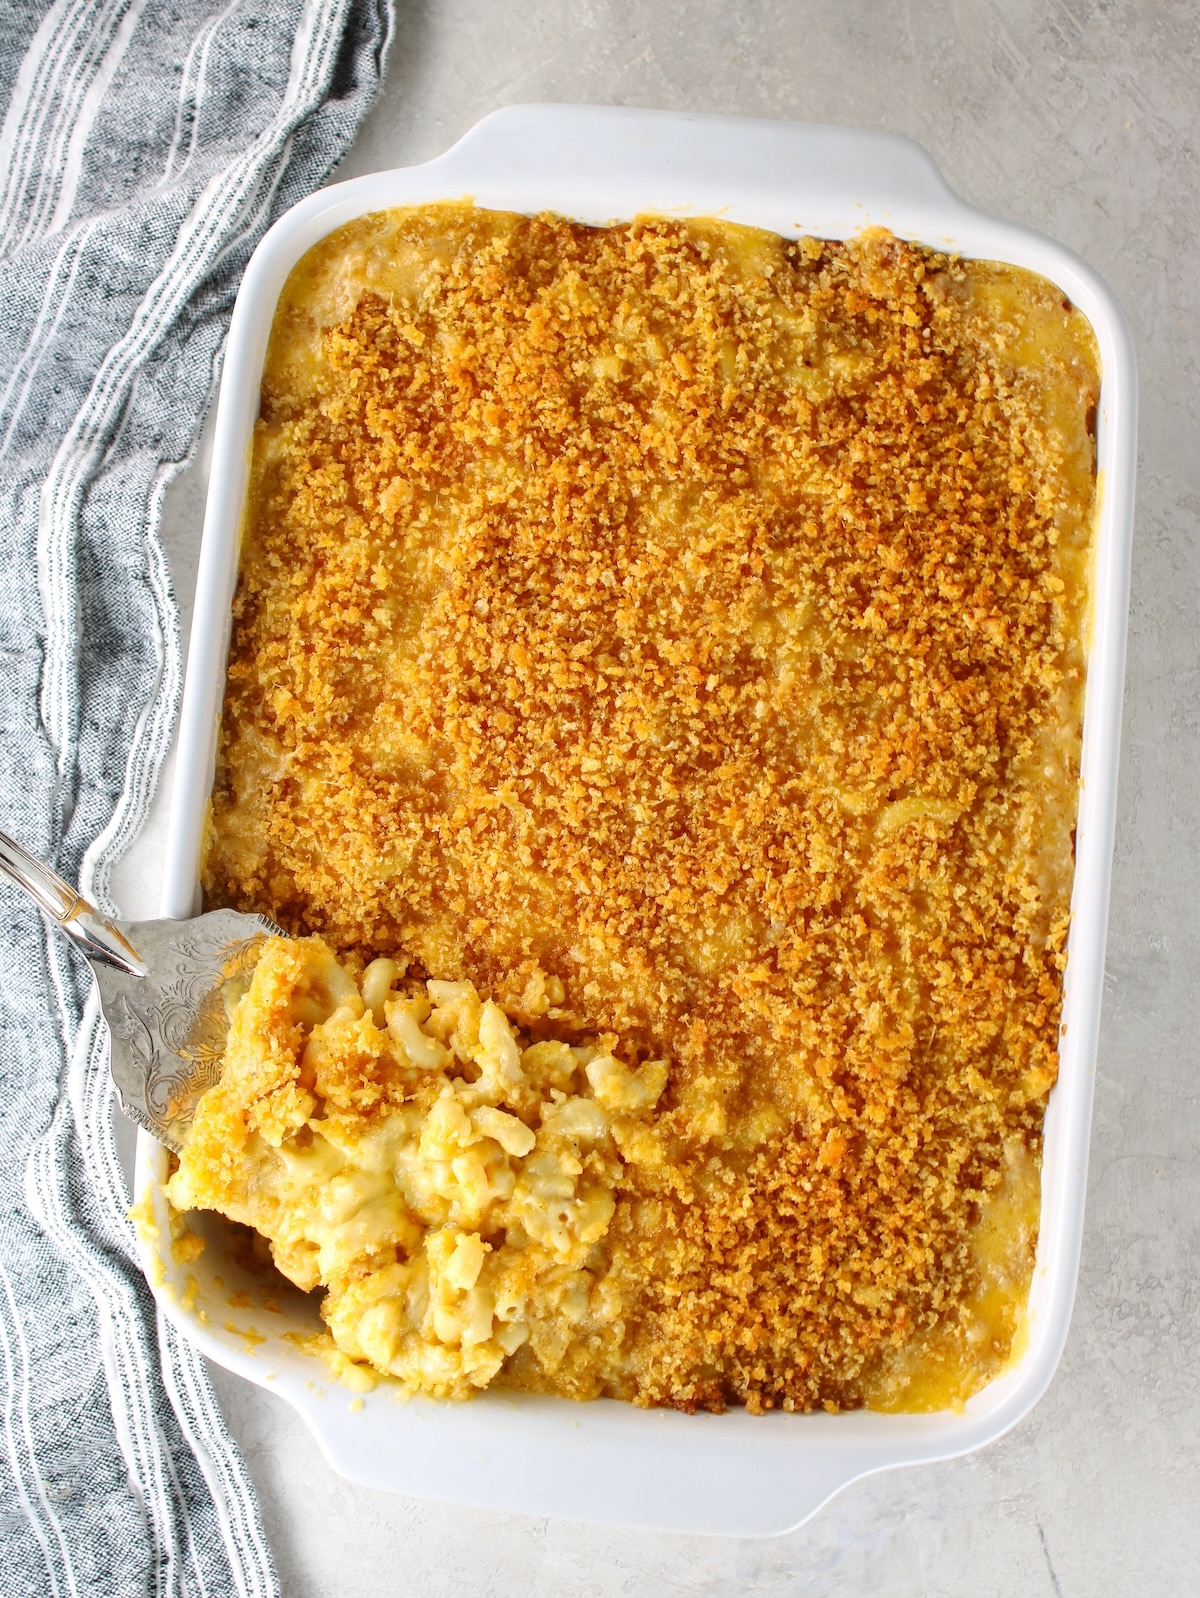 A 9x13 baking dish with baked macaroni and cheese.